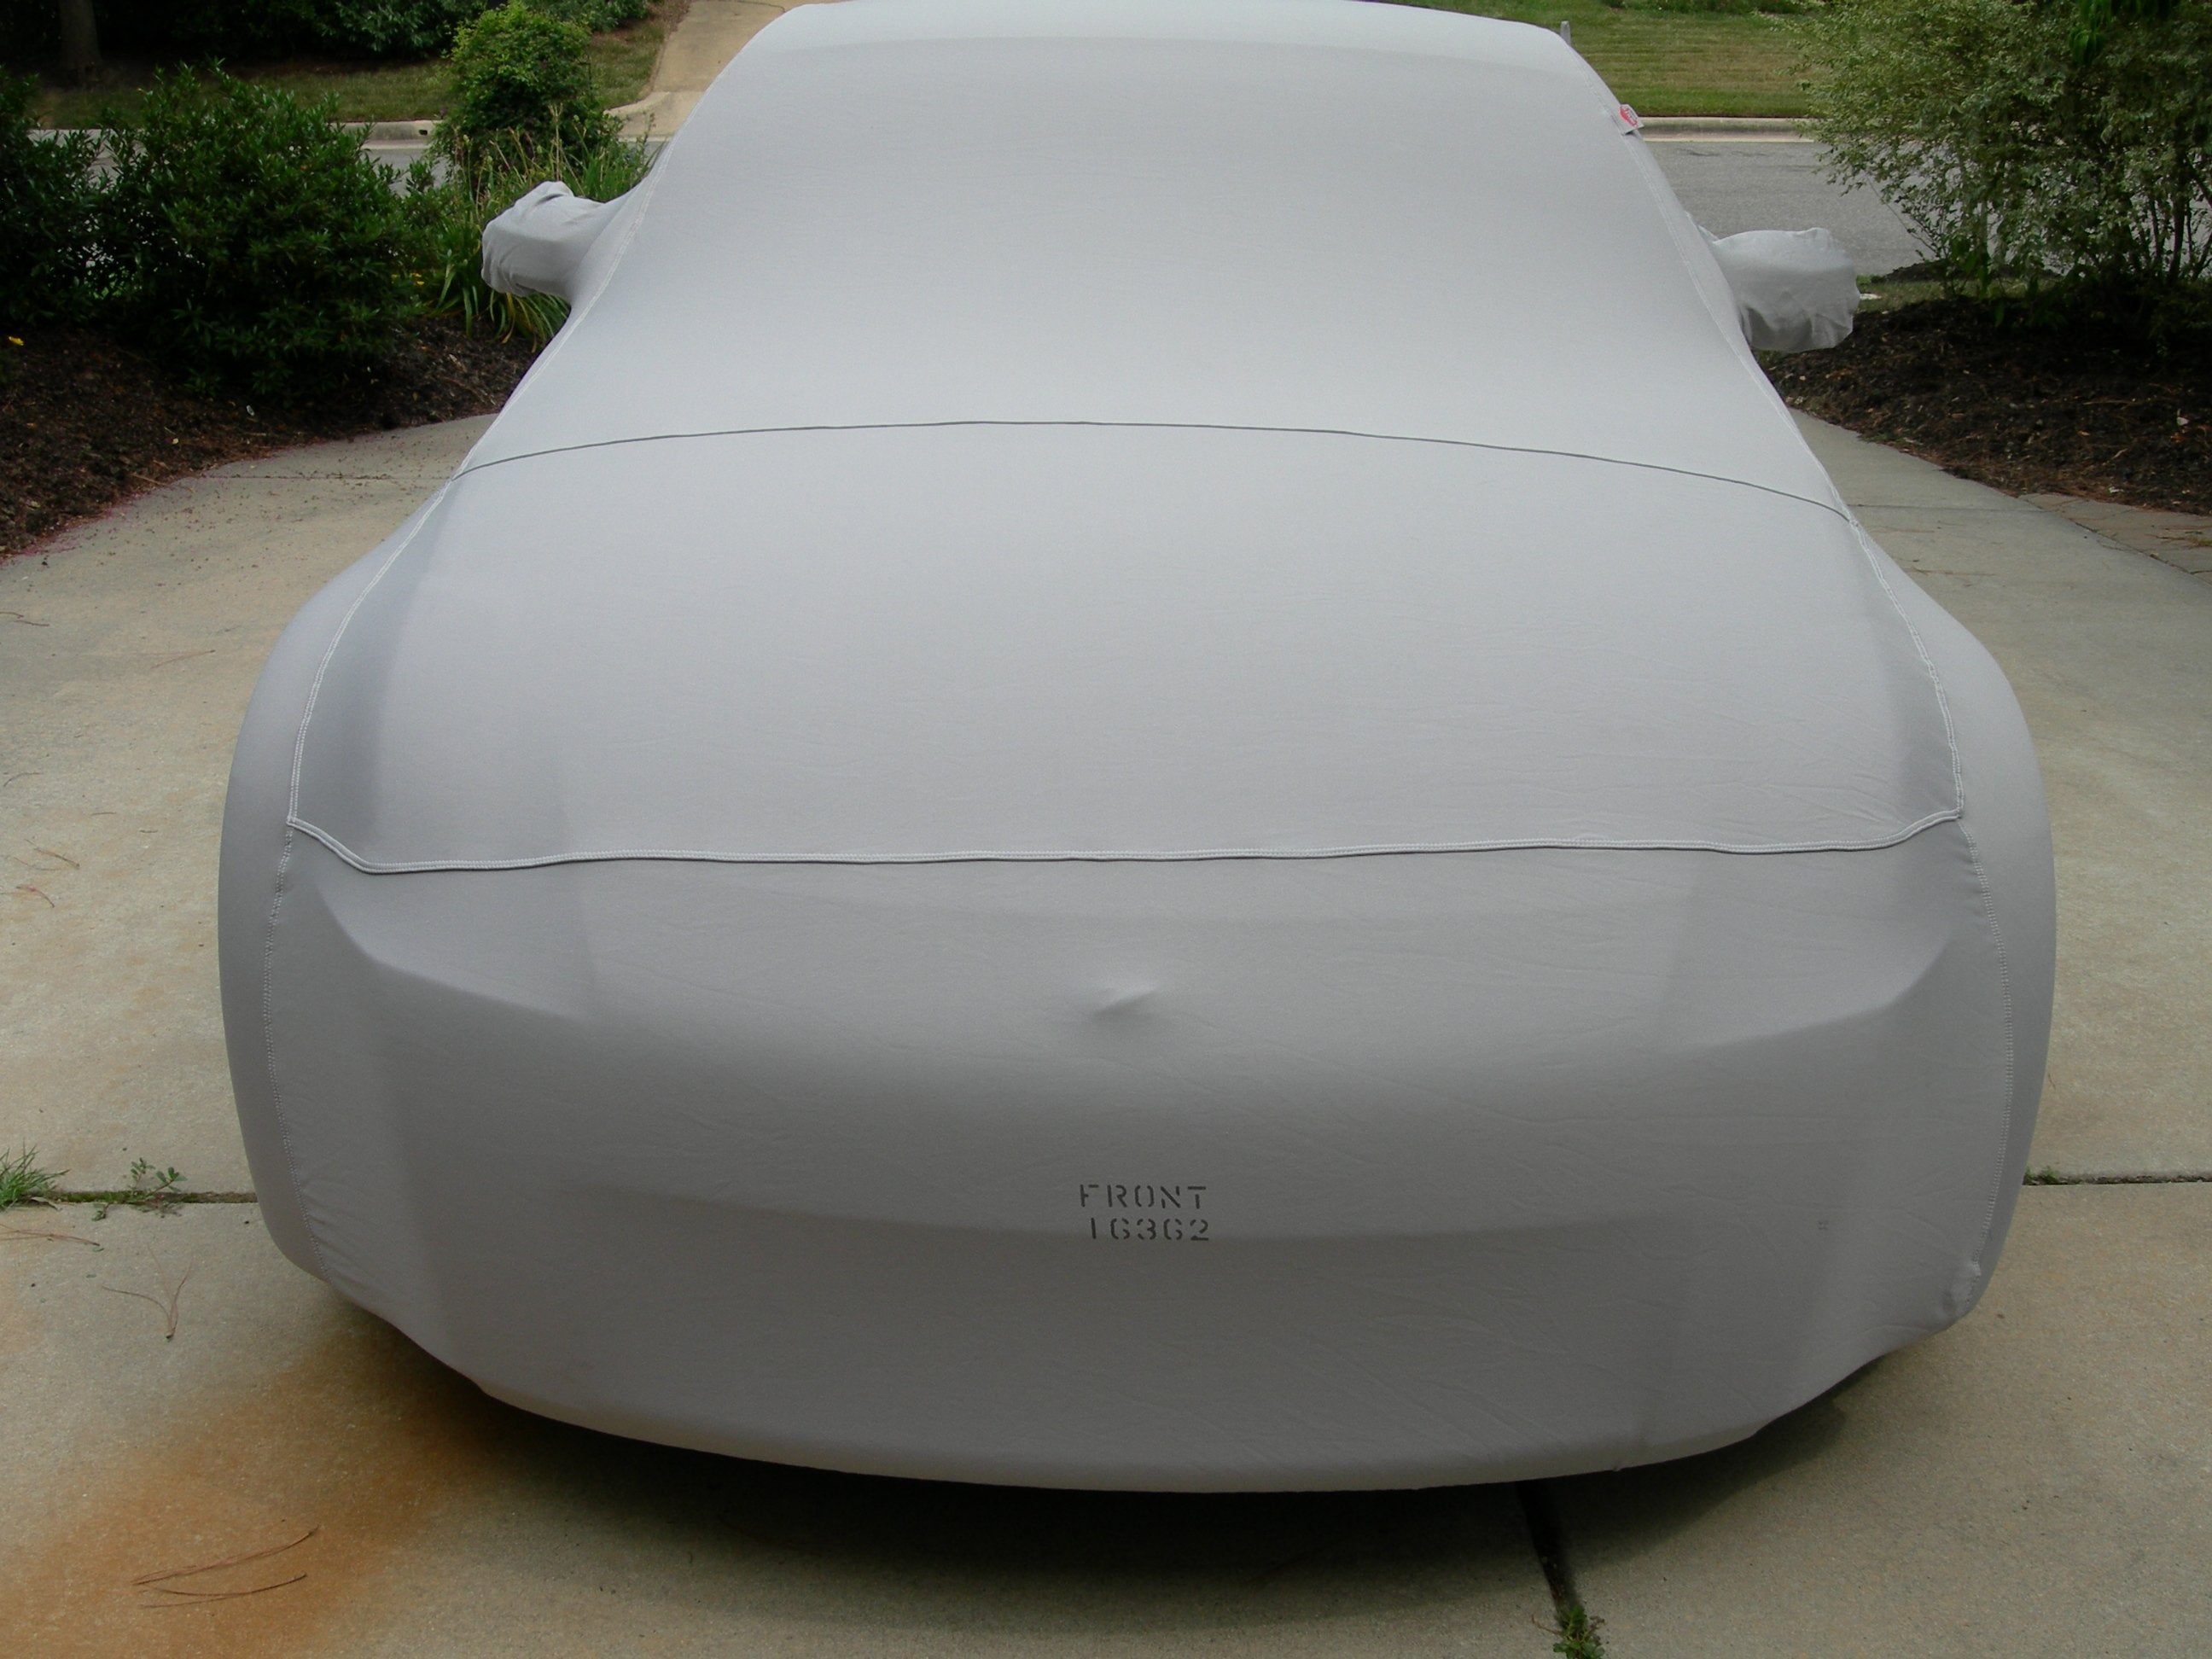 Covercraft Form Fit Car Cover for a 350 Z Coupe: $165